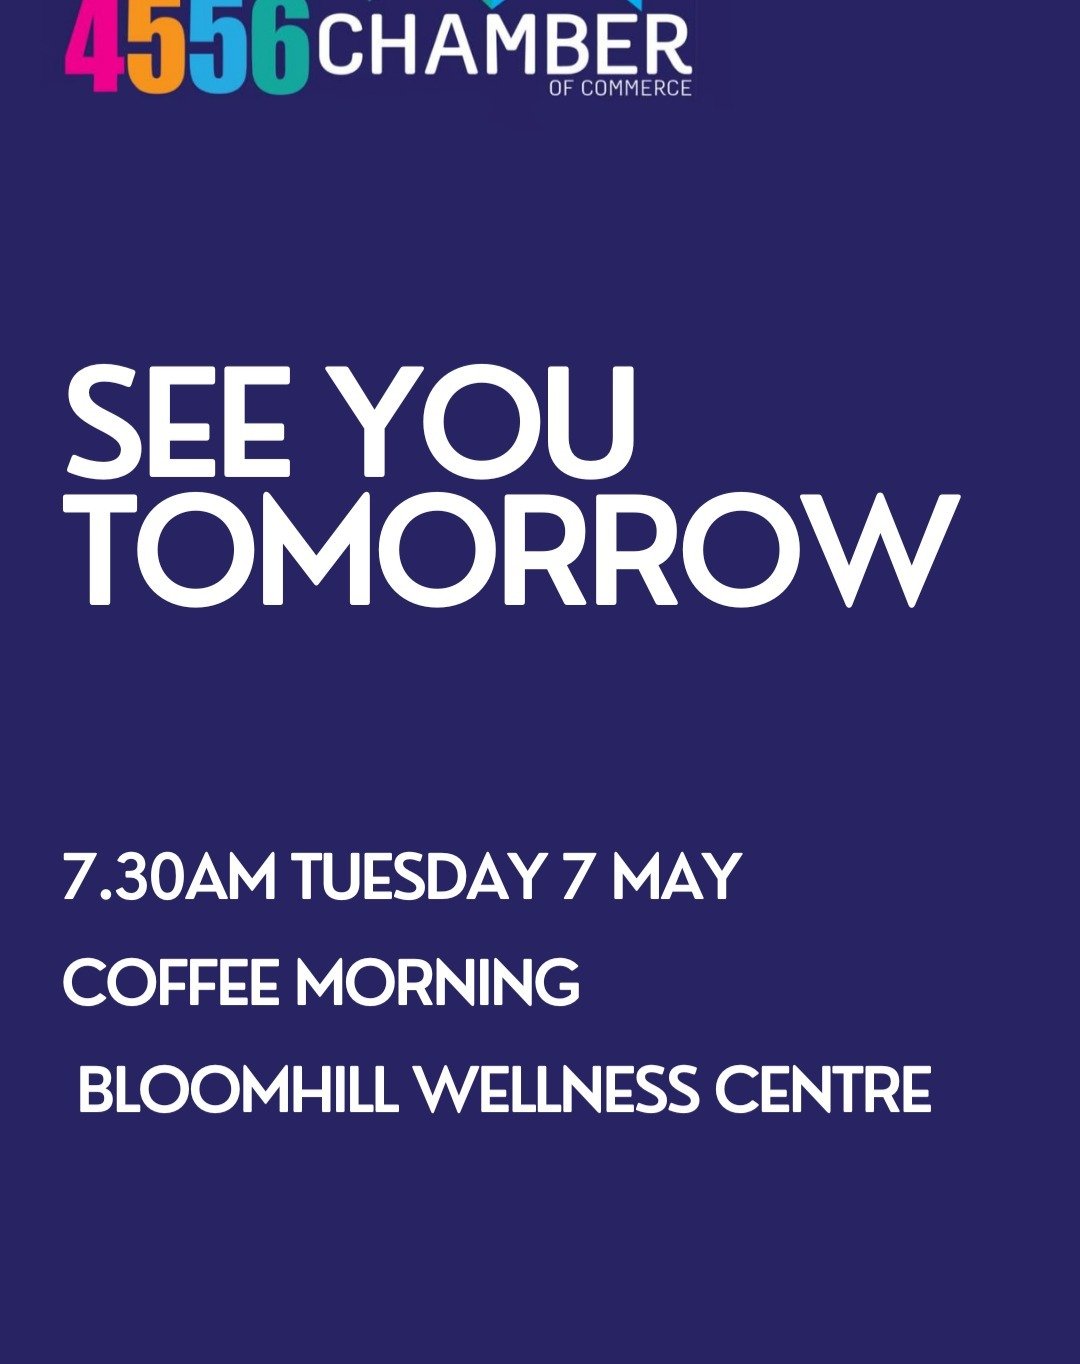 May coffee morning for business colleagues is TOMORROW! 

We'll meet up at @bloomhillcancercare on Ballinger Road, Buderim from 7.30am. 

#bloomhill #charitybeginsathome #4556chamberofcommerce #businessnetworking #sunshinecoastbusiness